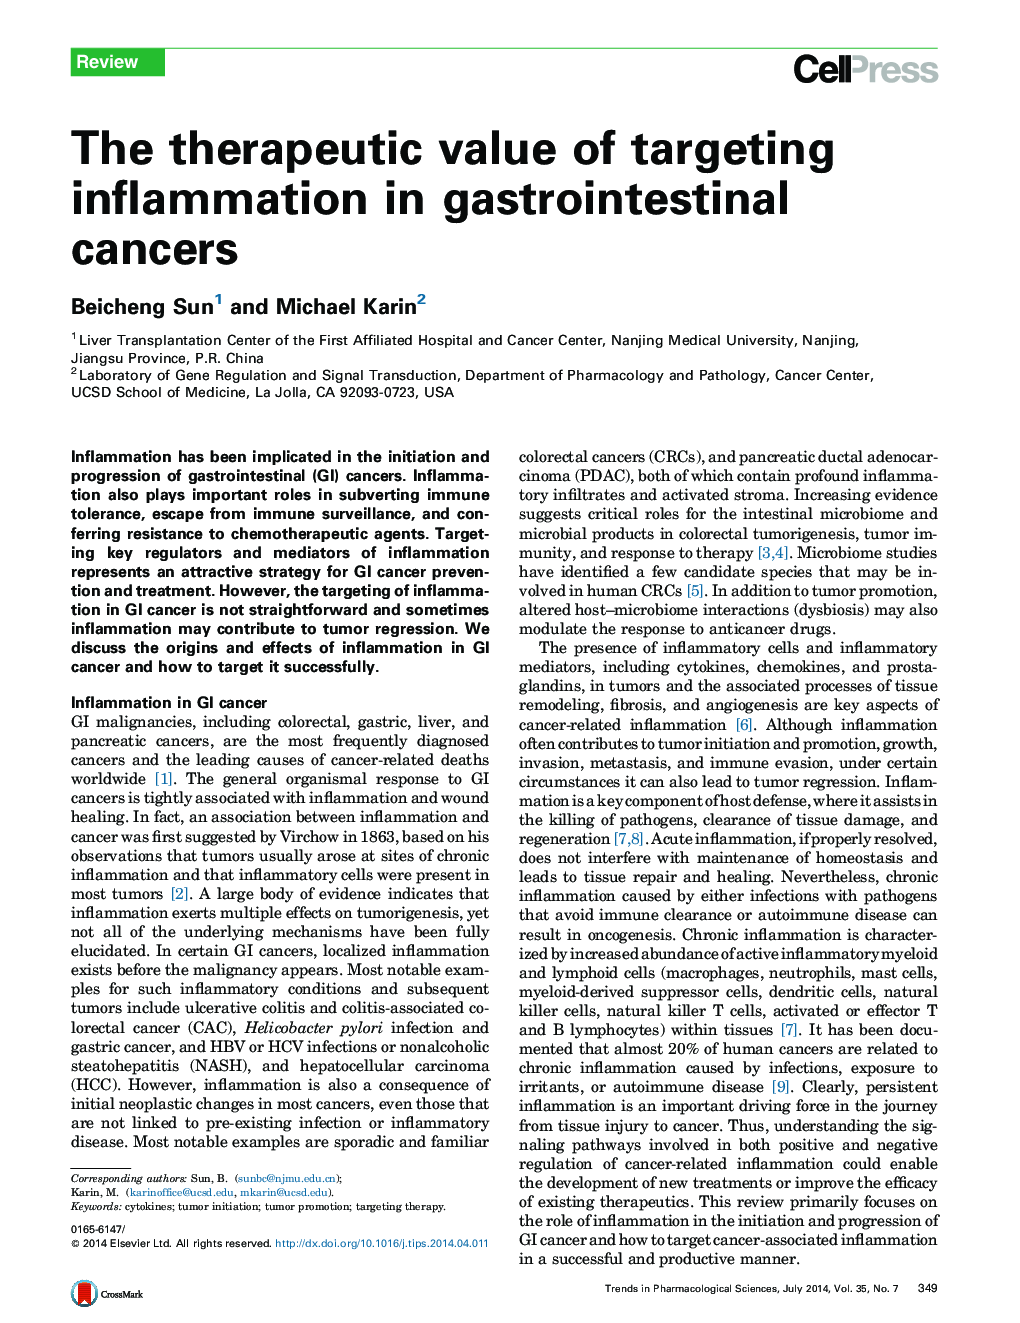 The therapeutic value of targeting inflammation in gastrointestinal cancers